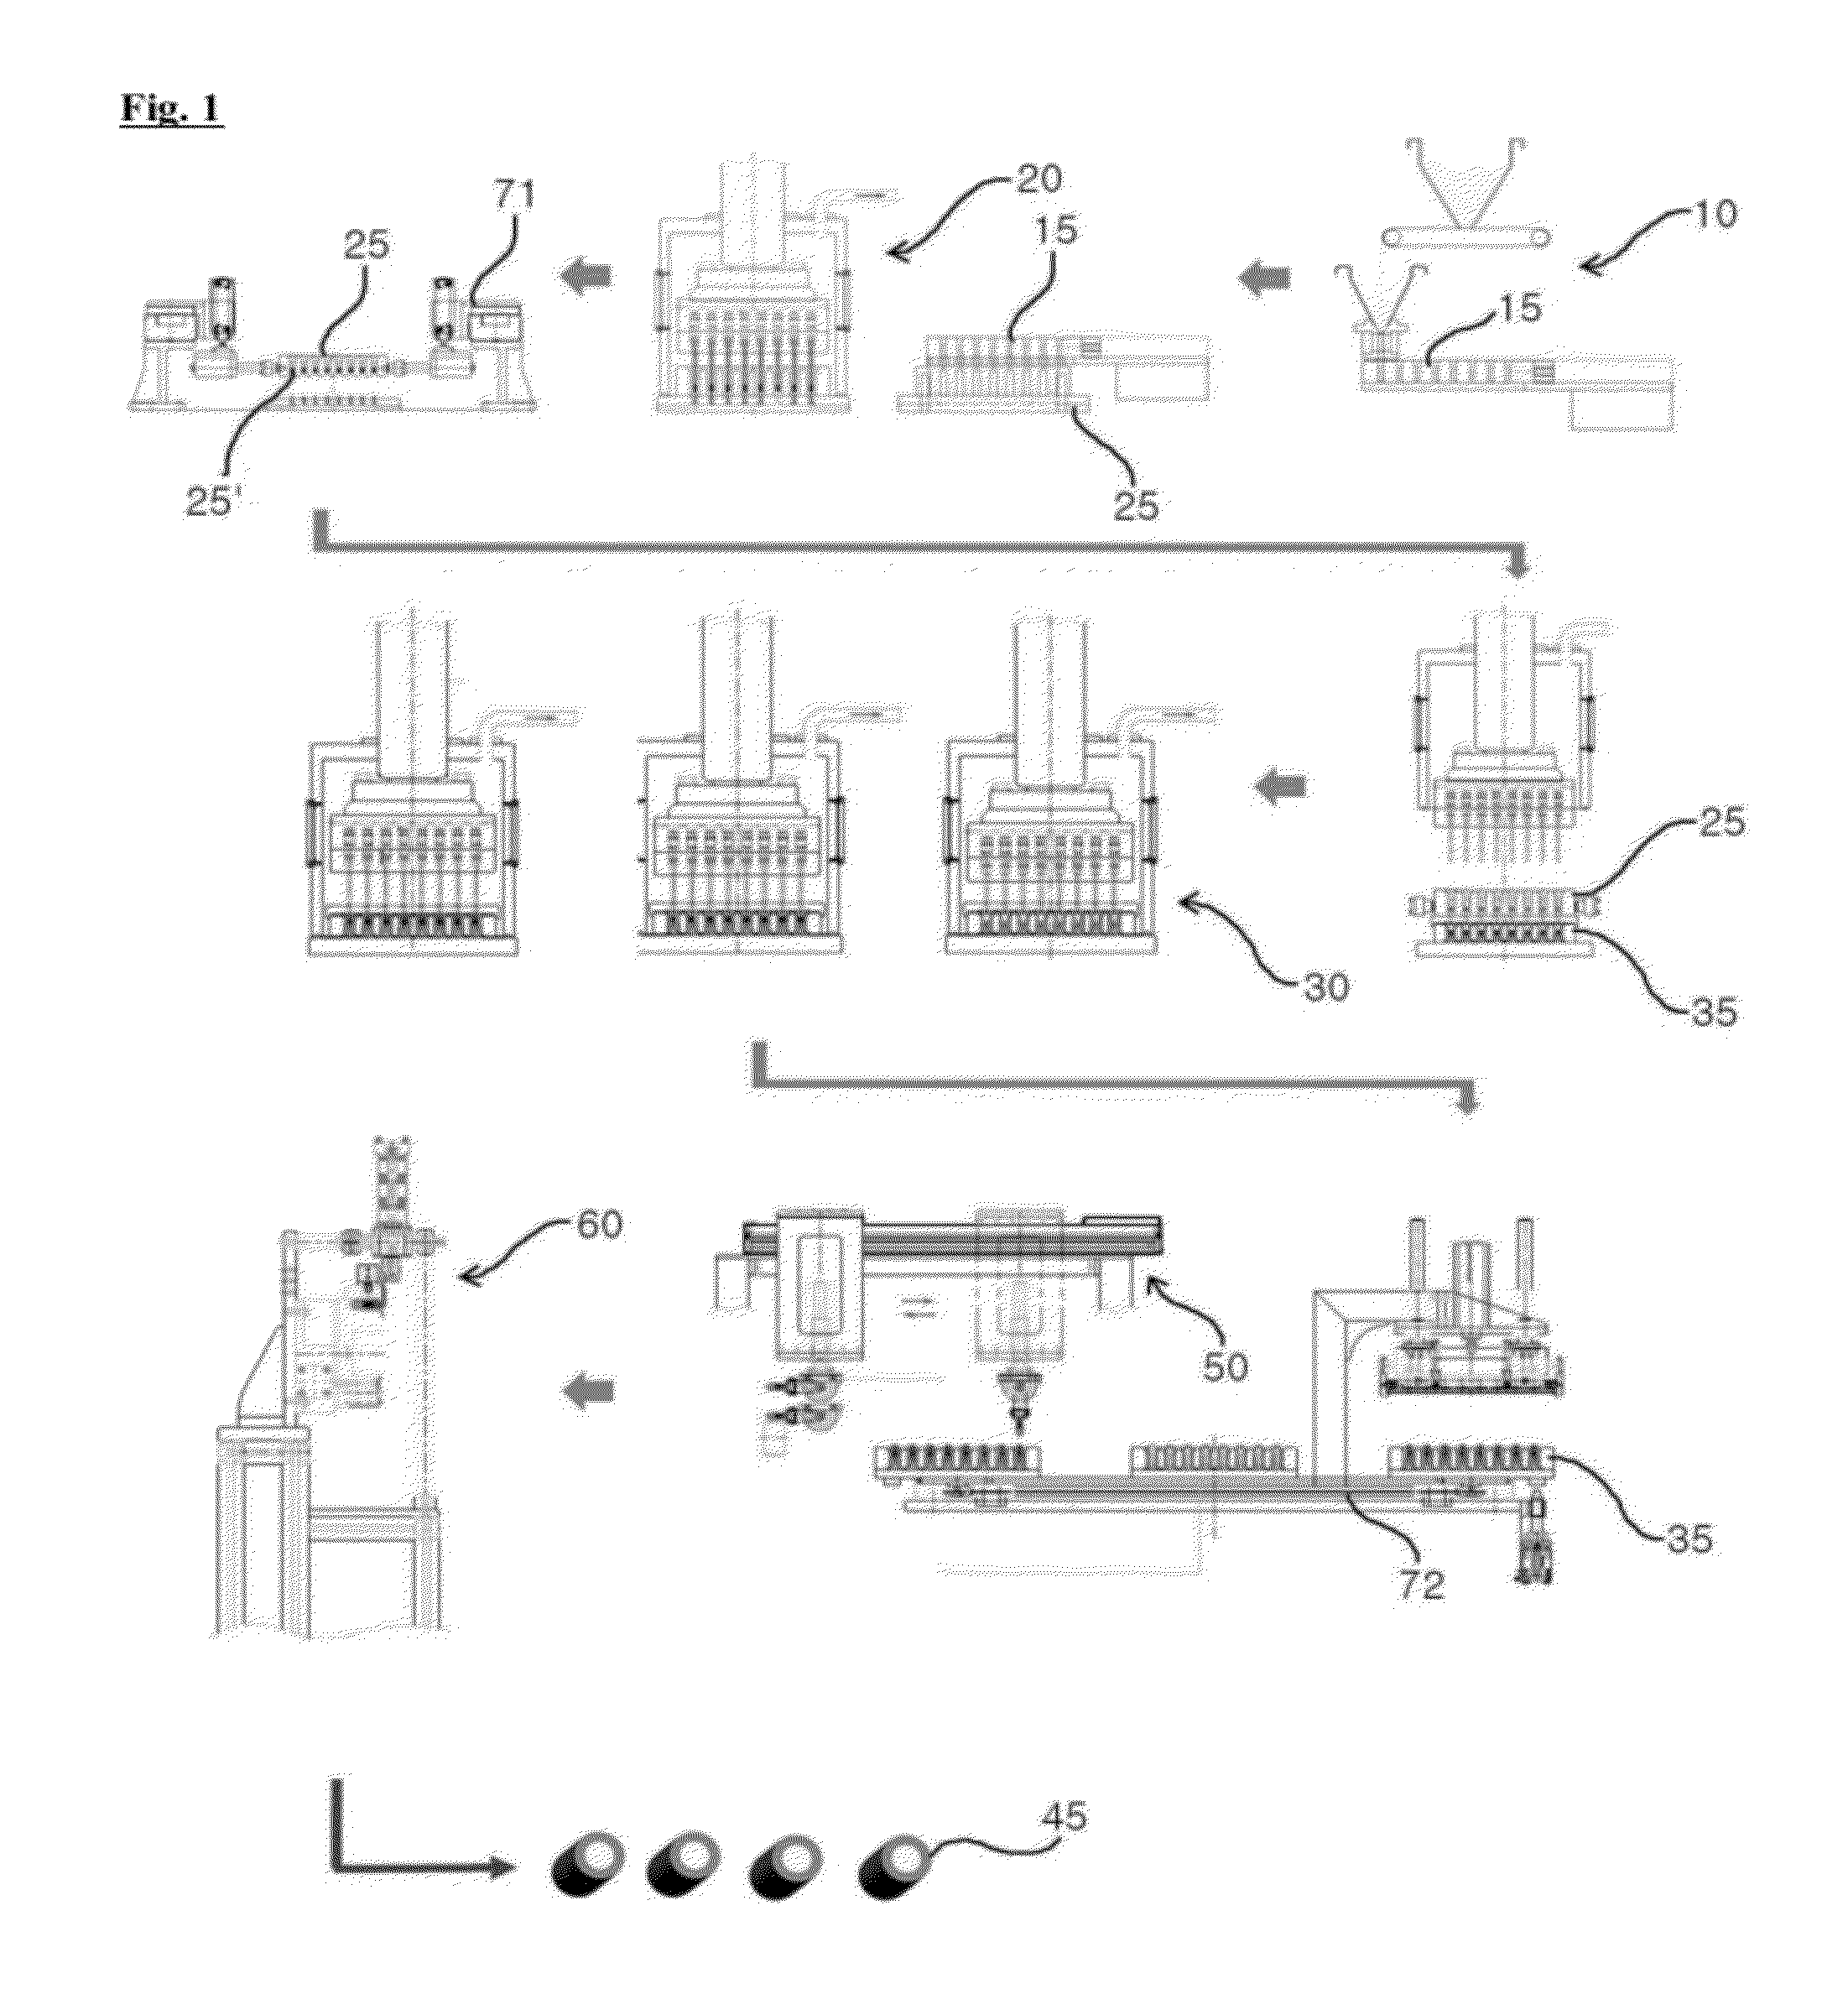 Method and apparatus for manufacturing a bullet charged with compressible composite explosives